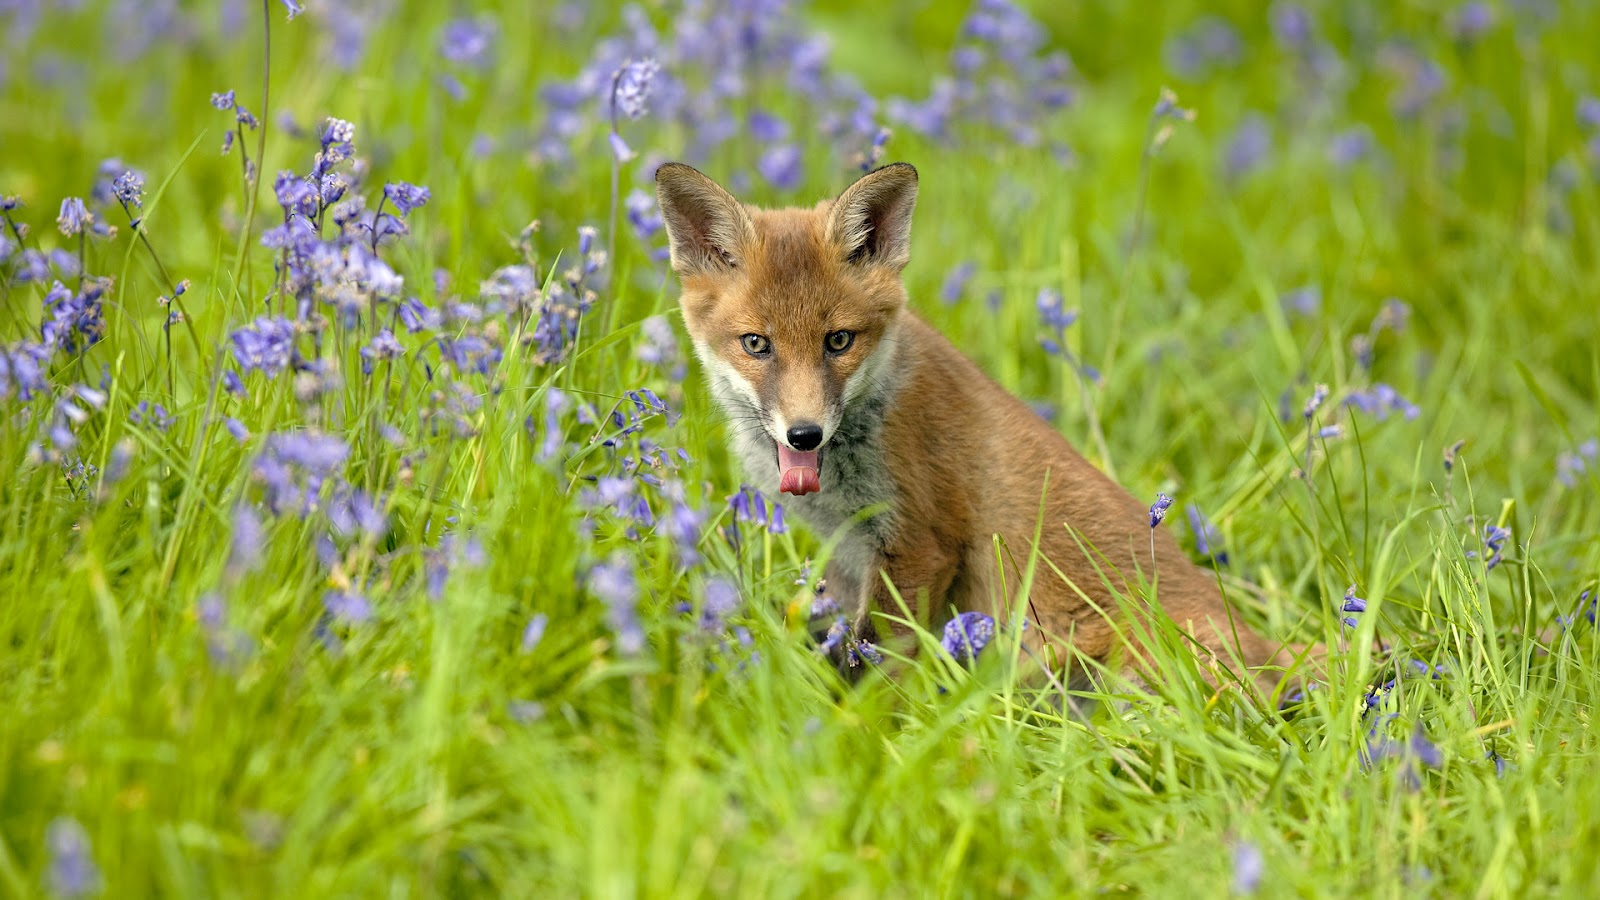 HD Animal Wallpaper Of A Red Fox In The High Grass